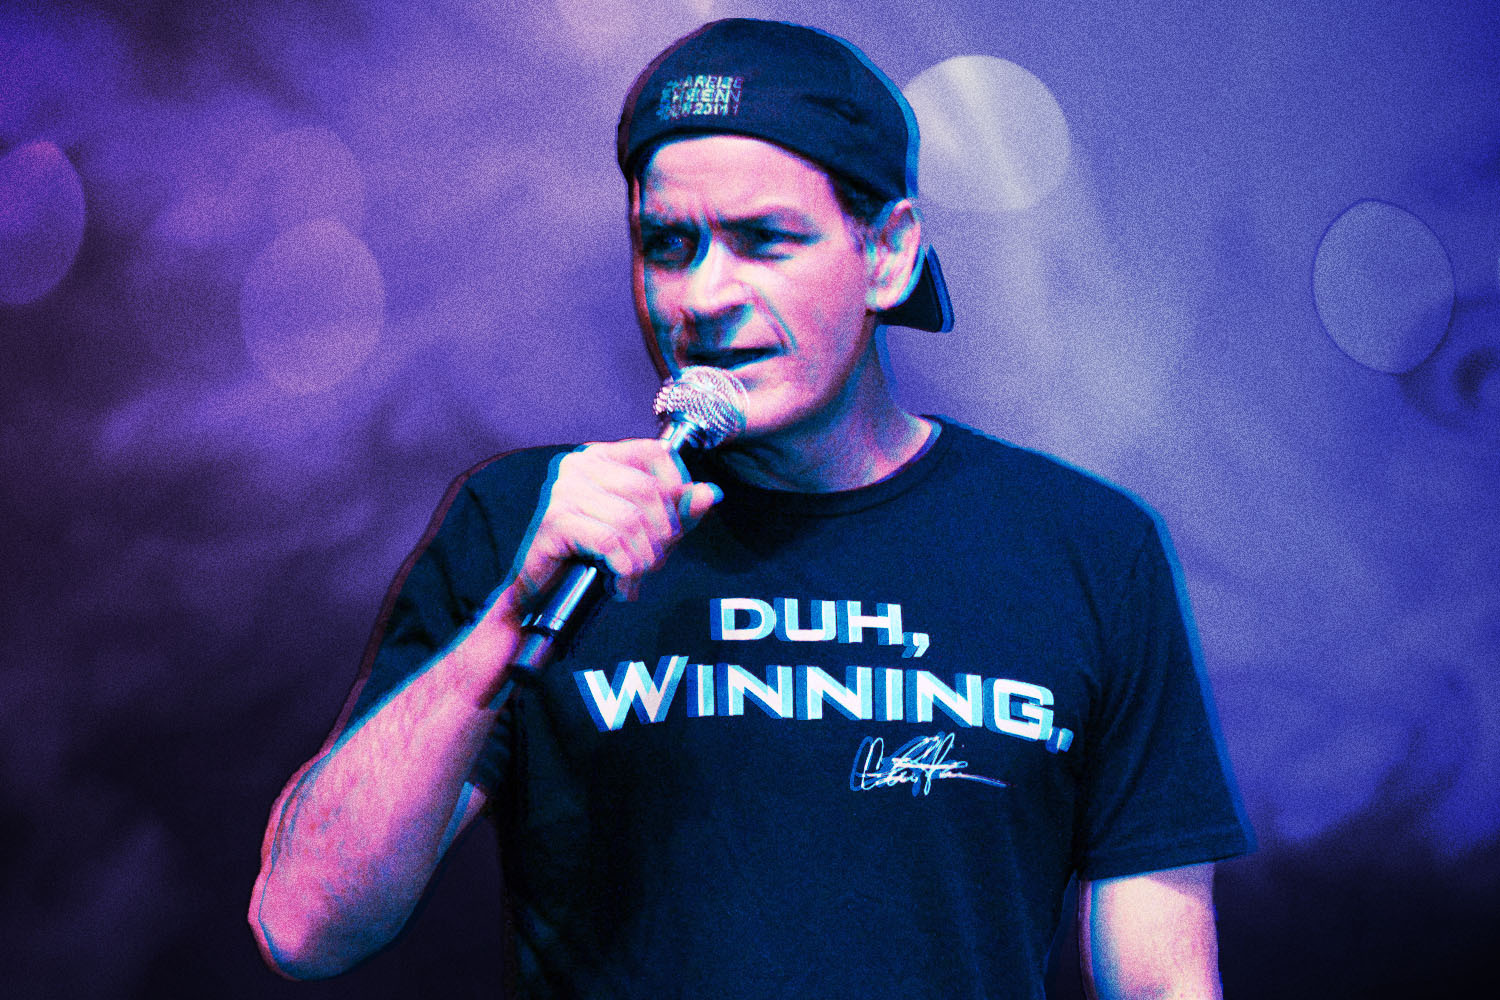 Charlie Sheen in his "Duh, winning" shirt during his ill-fated 2011 stage show/tour